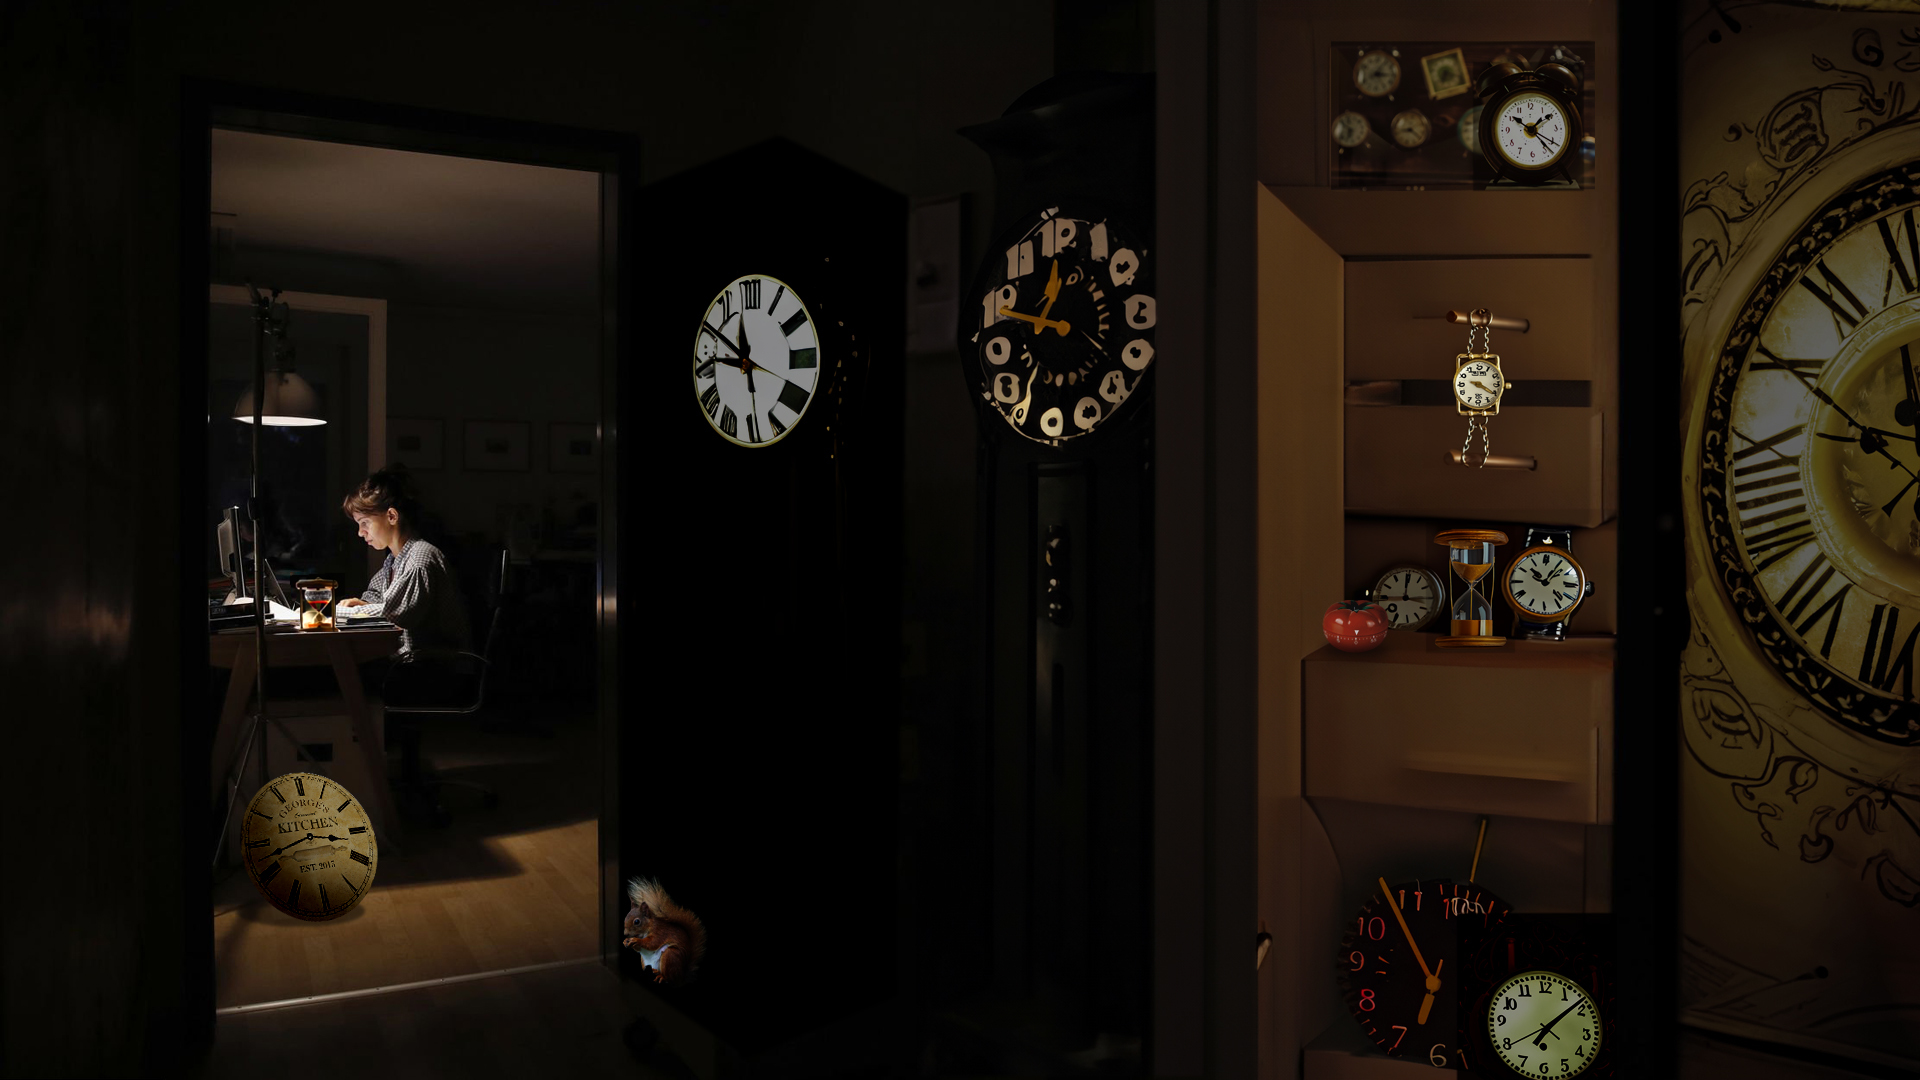 A hallway full of clocks, gives way to a view through an open door. In a room lit by a desk lamp, someone works at a computer. On their desk is an upturned hourglass. We all feel the pressure of time. Let's learn how manage, not magnify, it.